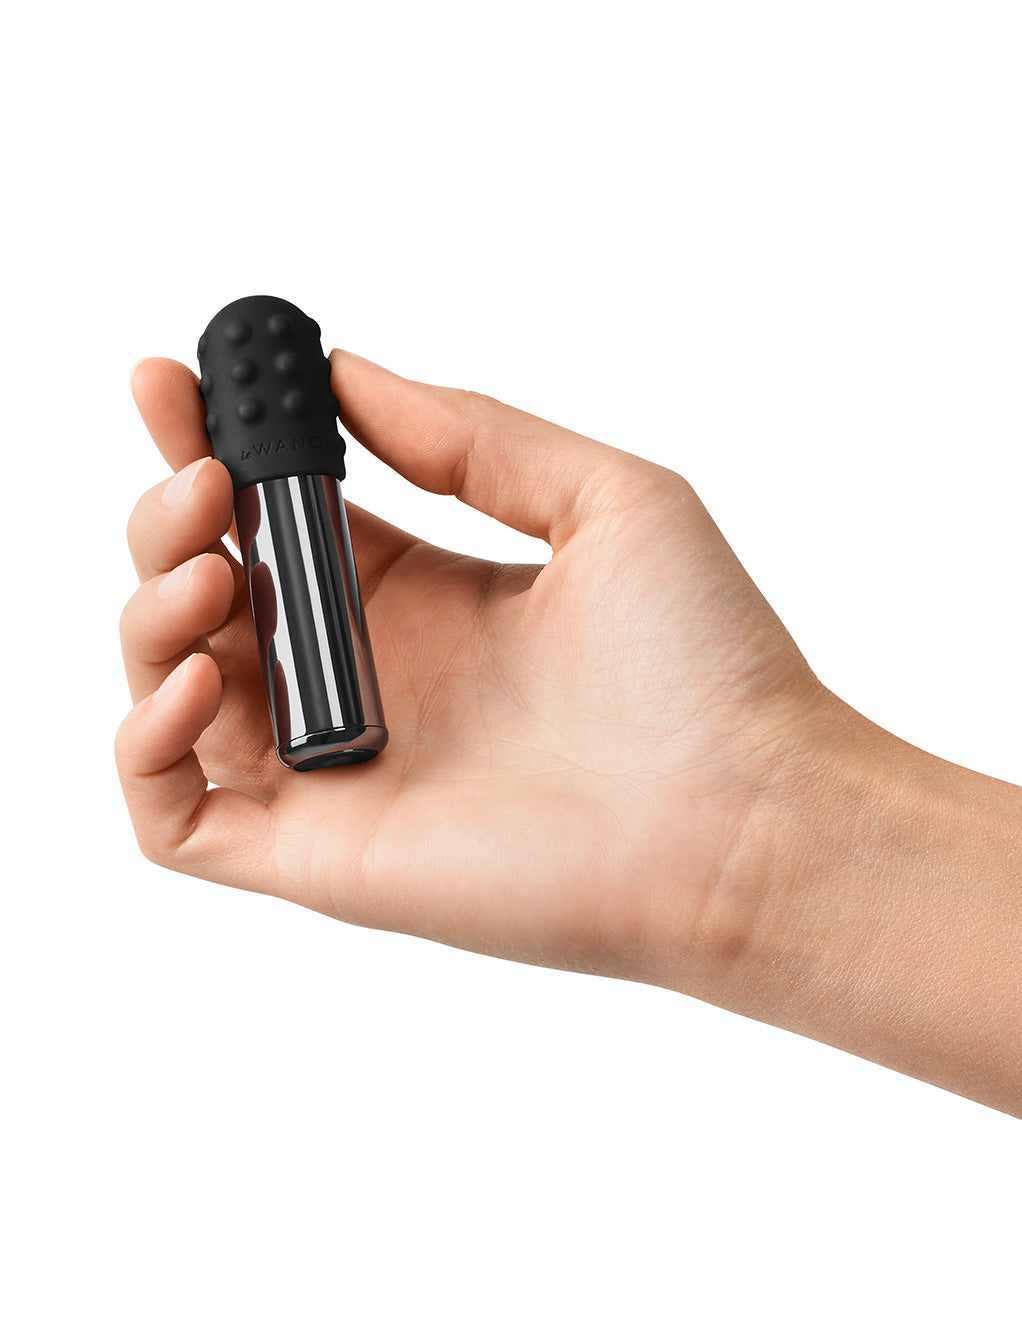 Le Wand Bullet Rechargeable Clitoral Vibrator- Black- In hand